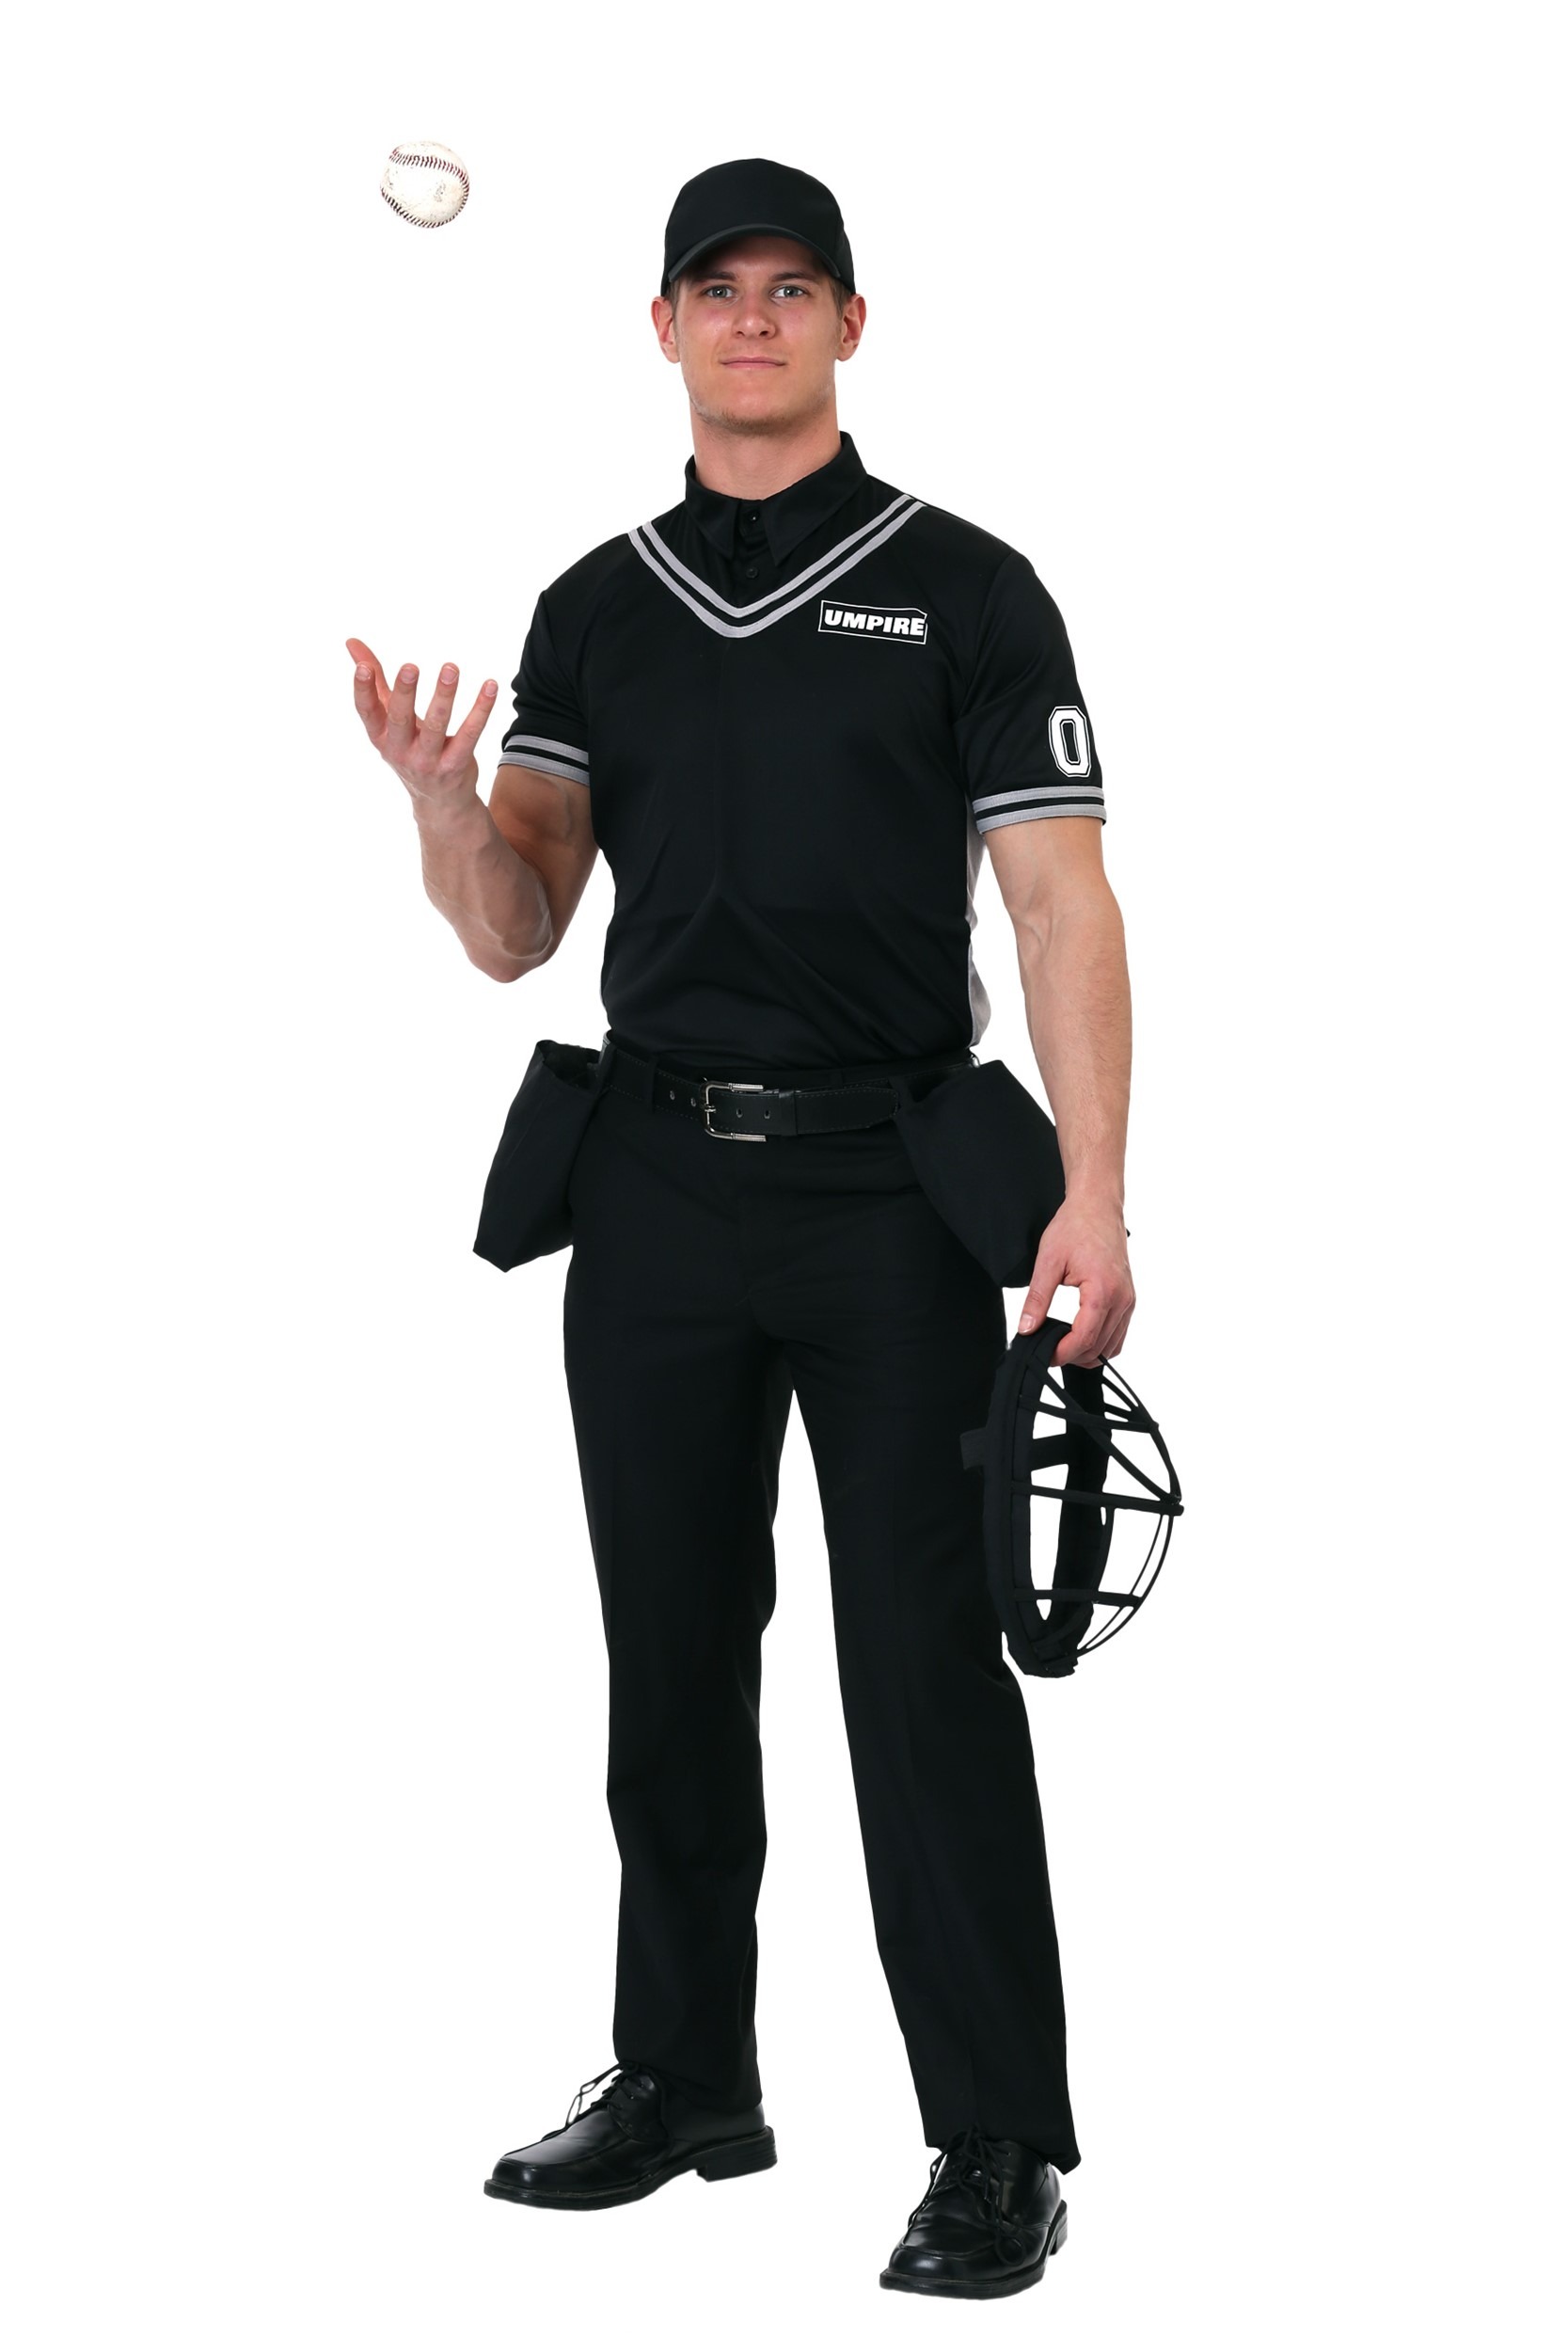 "Youre Out" Umpire Mens Costume